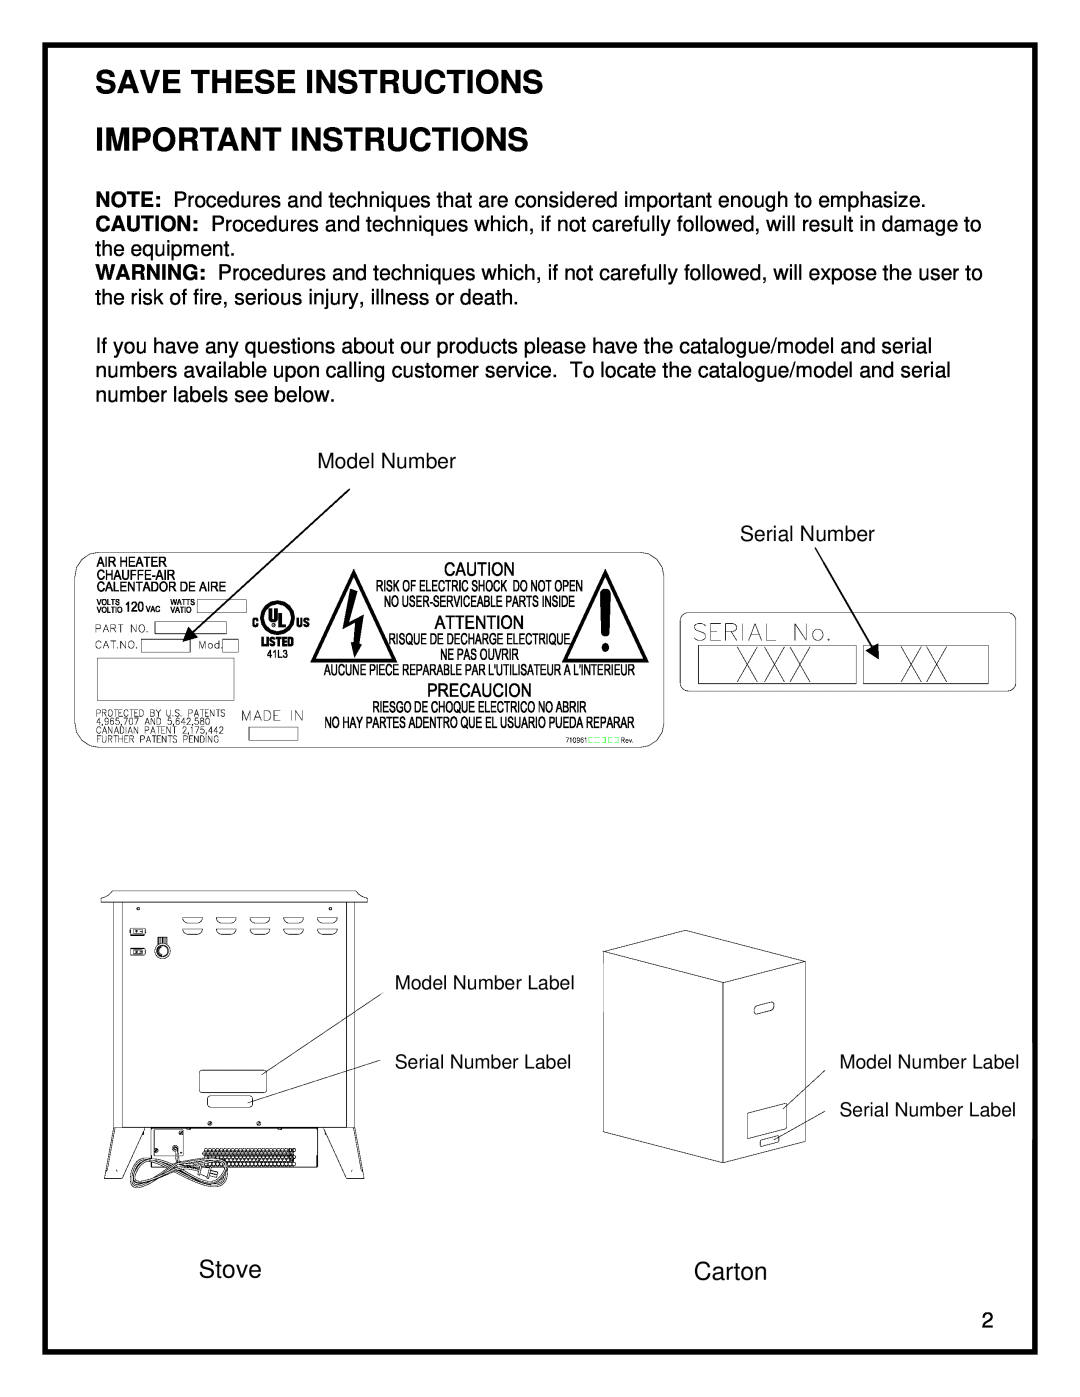 Dimplex THE ELECTRIC STOVE manual Save These Instructions Important Instructions, Stove, Carton 